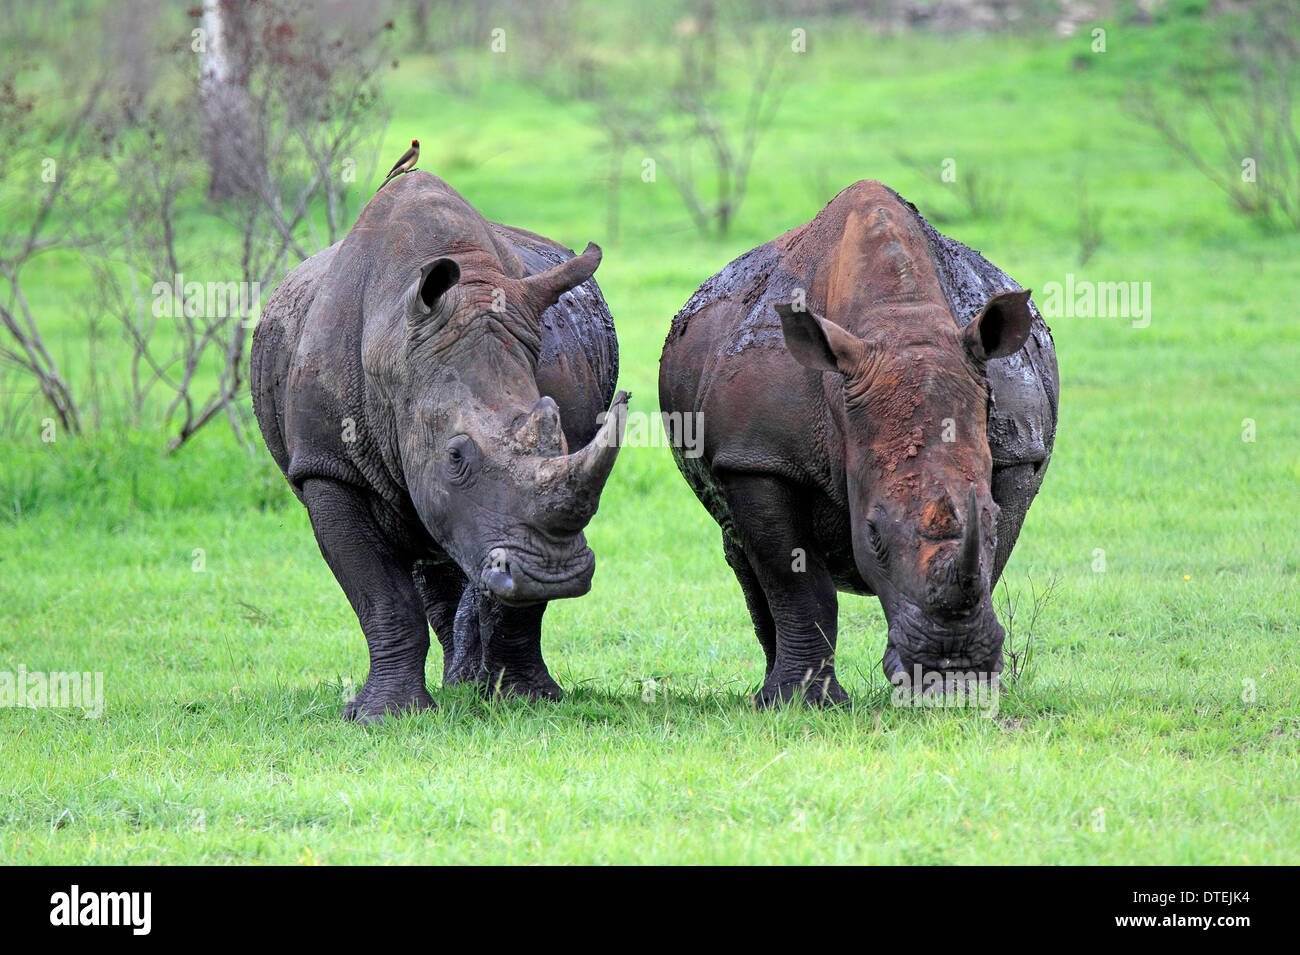 Wide-mouthed Rhinoceros, males, Sabi Sabi Game Reserve, Kruger national park, South Africa / (Ceratotherium simum) Stock Photo